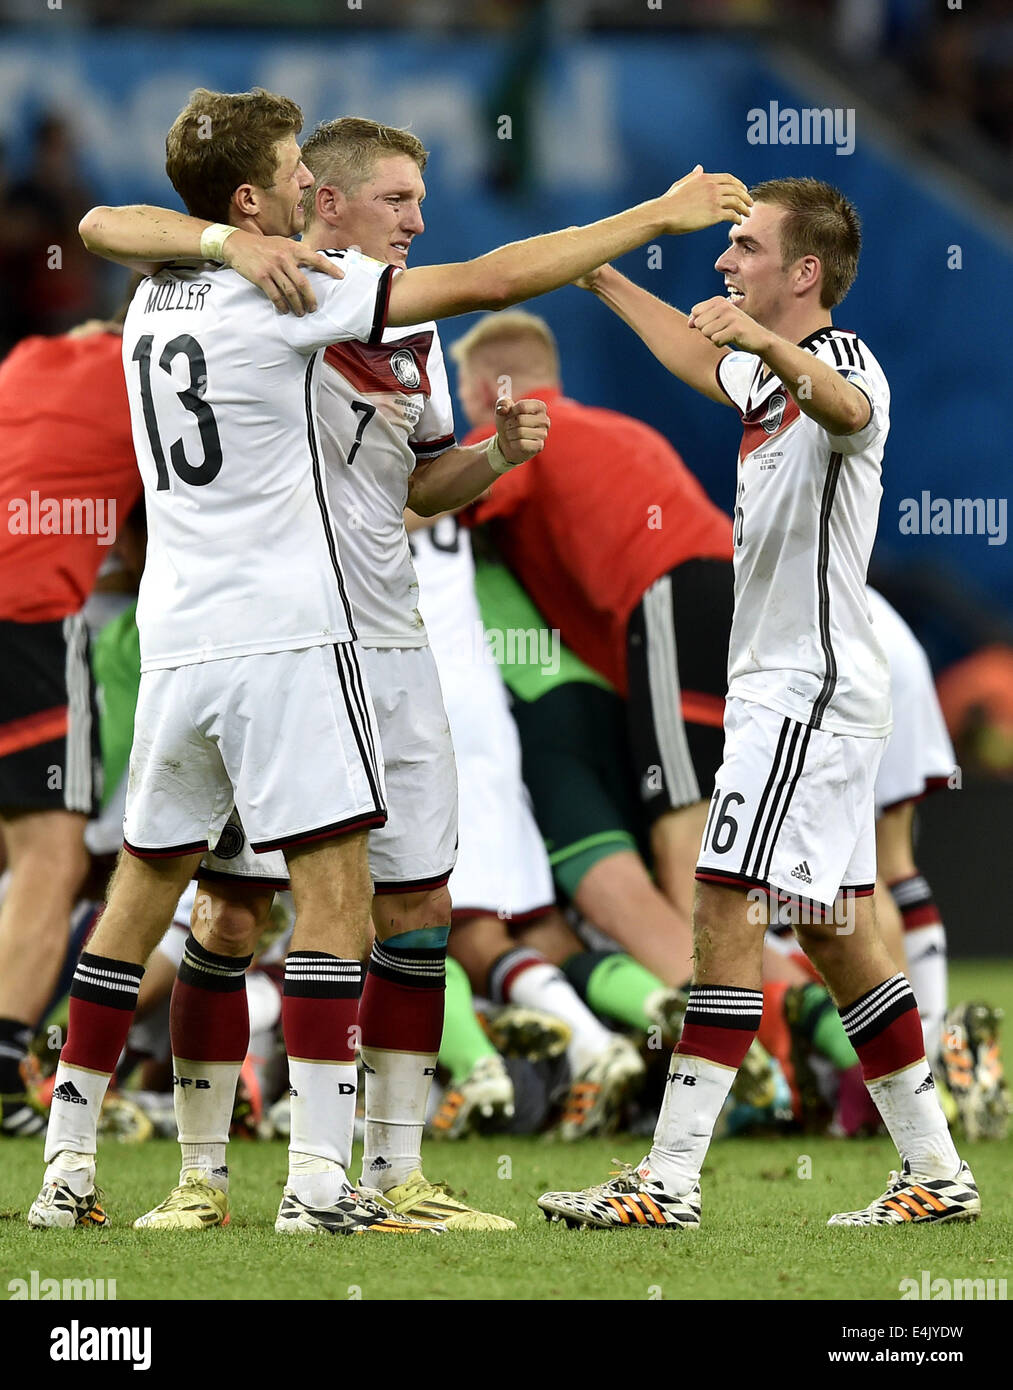 Rio De Janeiro, Brazil. 13th July, 2014. Germany's Thomas Muller (L), Bastian Schweinsteiger (C) and Philipp Lahm celebrate their victory after the final match between Germany and Argentina of 2014 FIFA World Cup at the Estadio do Maracana Stadium in Rio de Janeiro, Brazil, on July 13, 2014. Germany won 1-0 over Argentina after 120 minutes and took its fourth World Cup title on Sunday. Credit:  Qi Heng/Xinhua/Alamy Live News Stock Photo